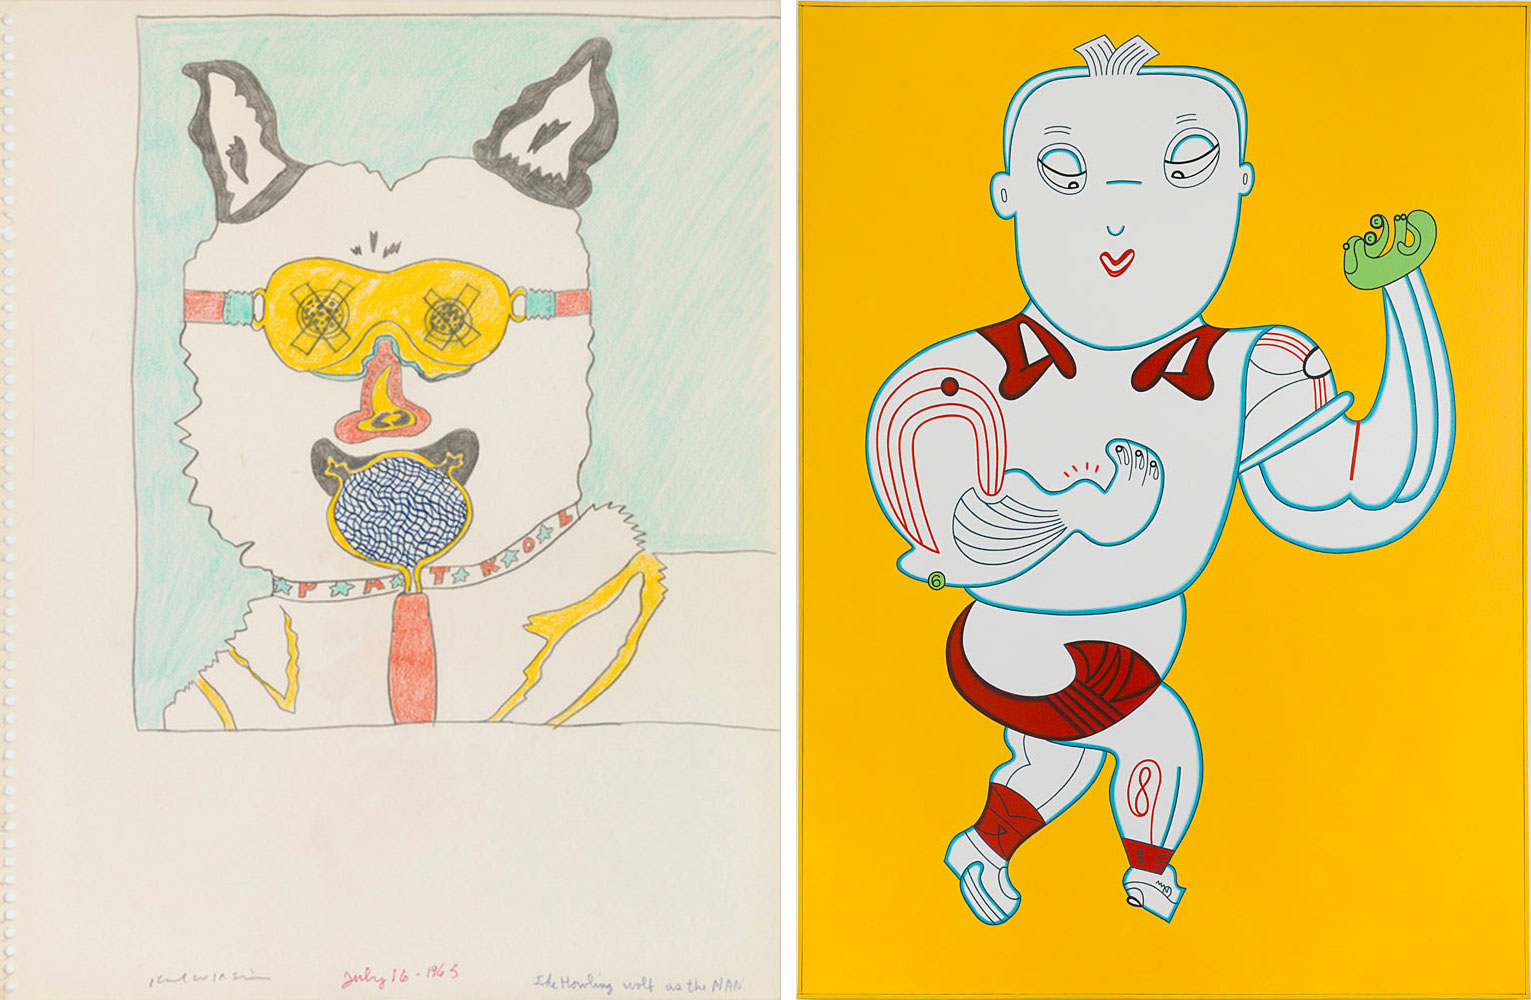 Left: Karl Wirsum, Untitled (Study for "No Dogs Aloud"), 1965, Ink, graphite and color pencil on paper, 14 x 11 inches, © Karl Wirsum, Courtesy the artist and Derek Eller GalleryRight: Karl Wirsum, Thumb Thwack, 1986, Acrylic on canvas with painted wood frame, 50.5 x 35,25 inches, © Karl Wirsum, Courtesy the artist and Derek Eller Gallery 